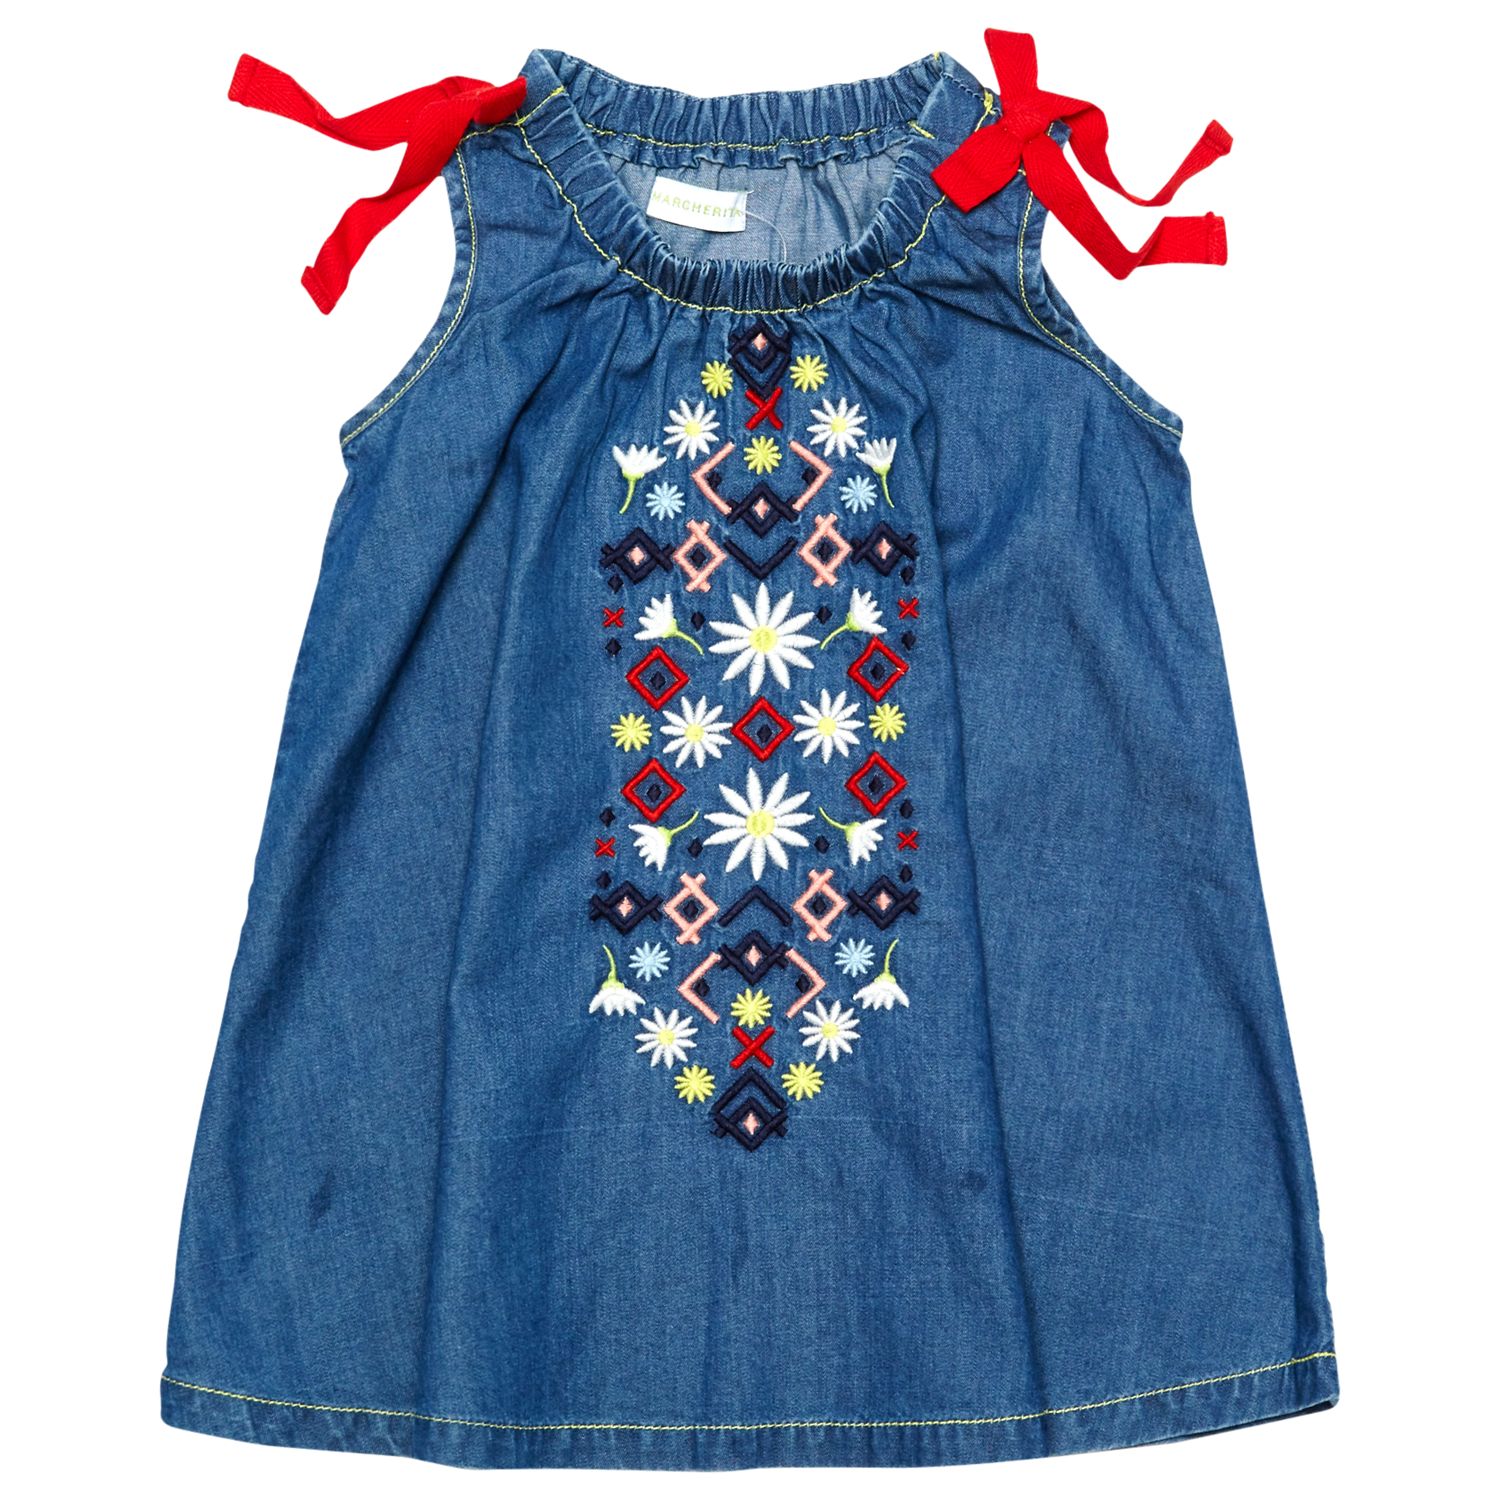 Margherita Kids Baby Embroidered Chambray Dress, Blue